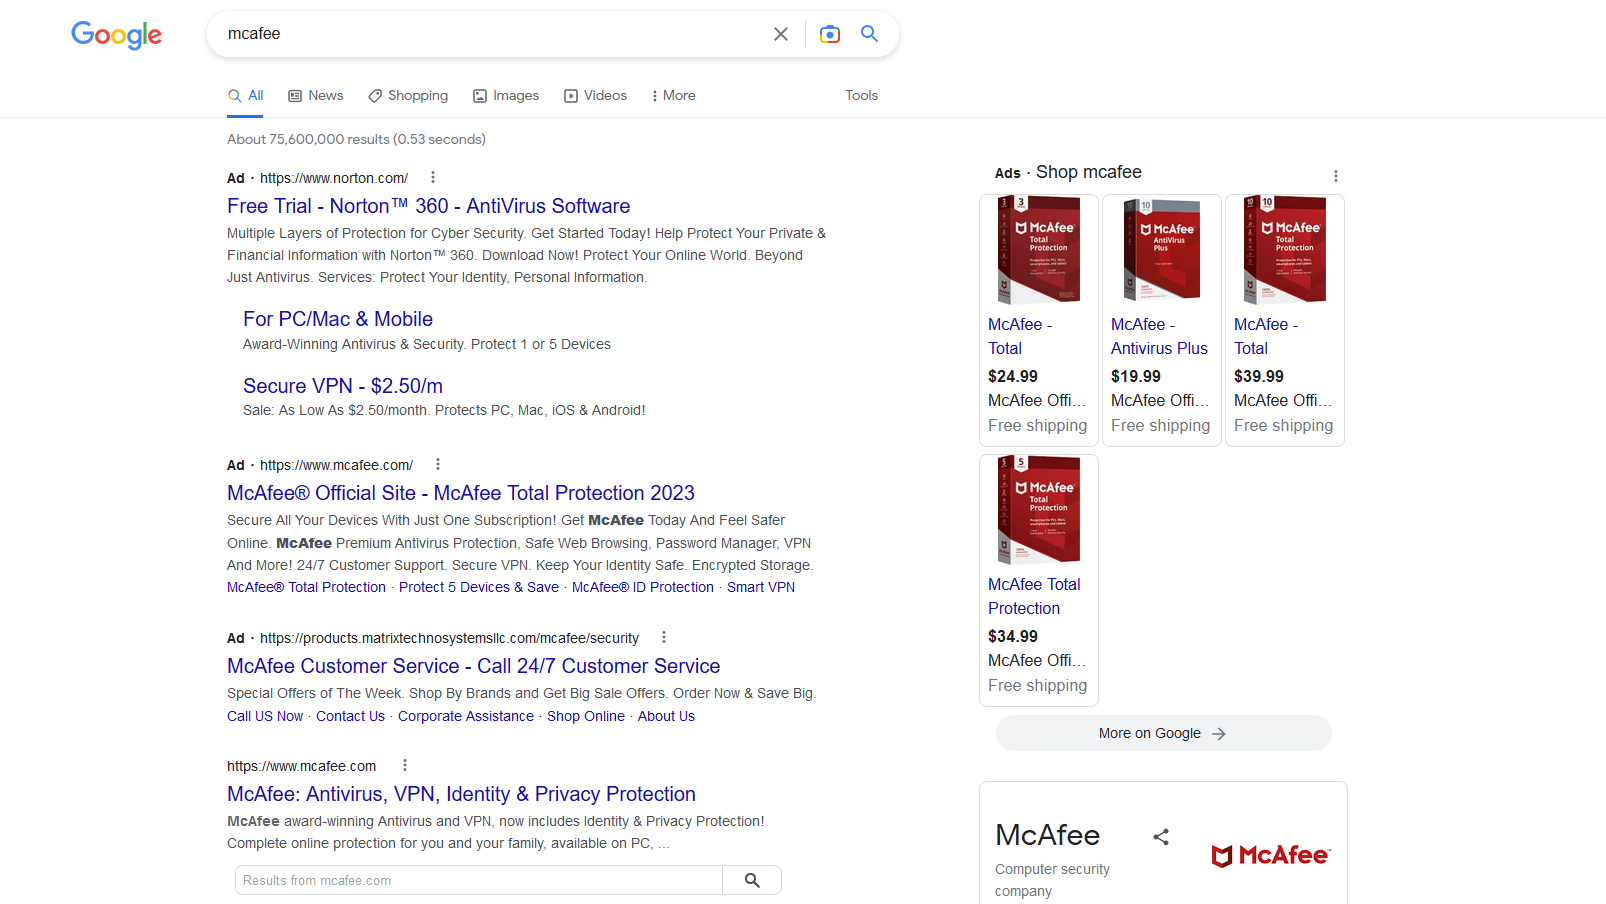 Results for "mcafee" in Google